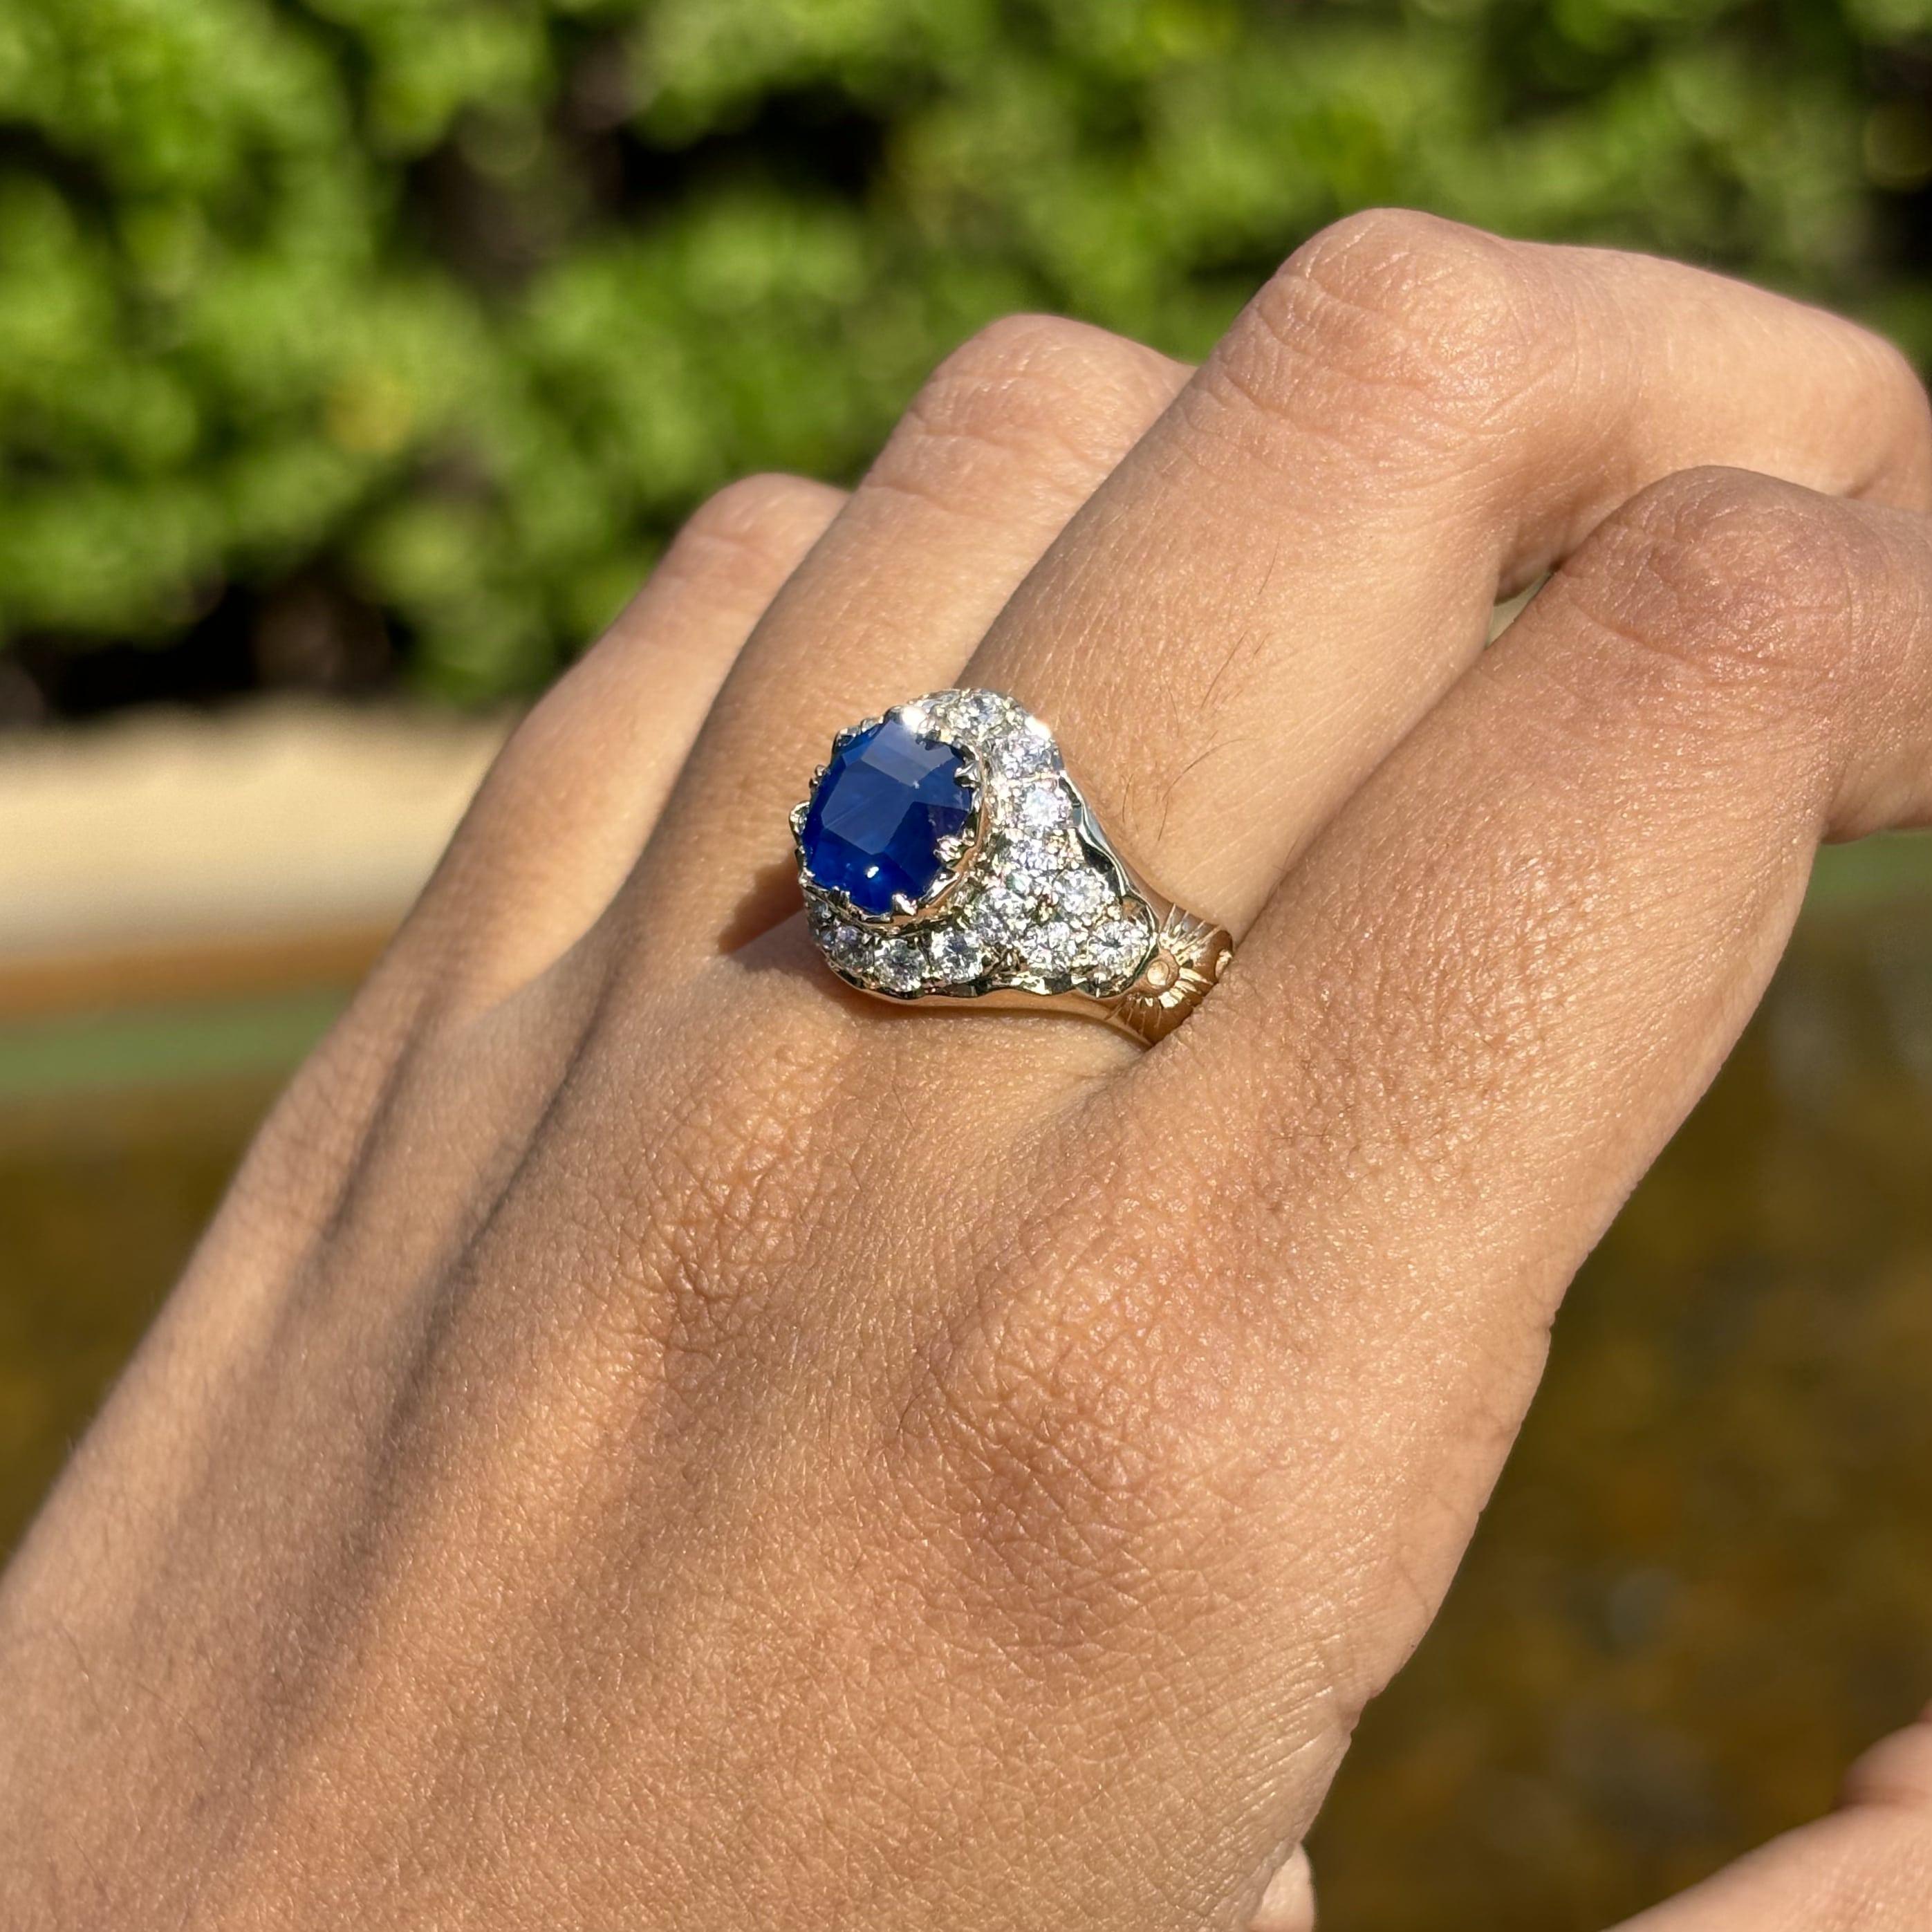   2.64 Carat Royal Blue Sapphire Ring with Old Mine Cut Diamonds in 18K Gold 6